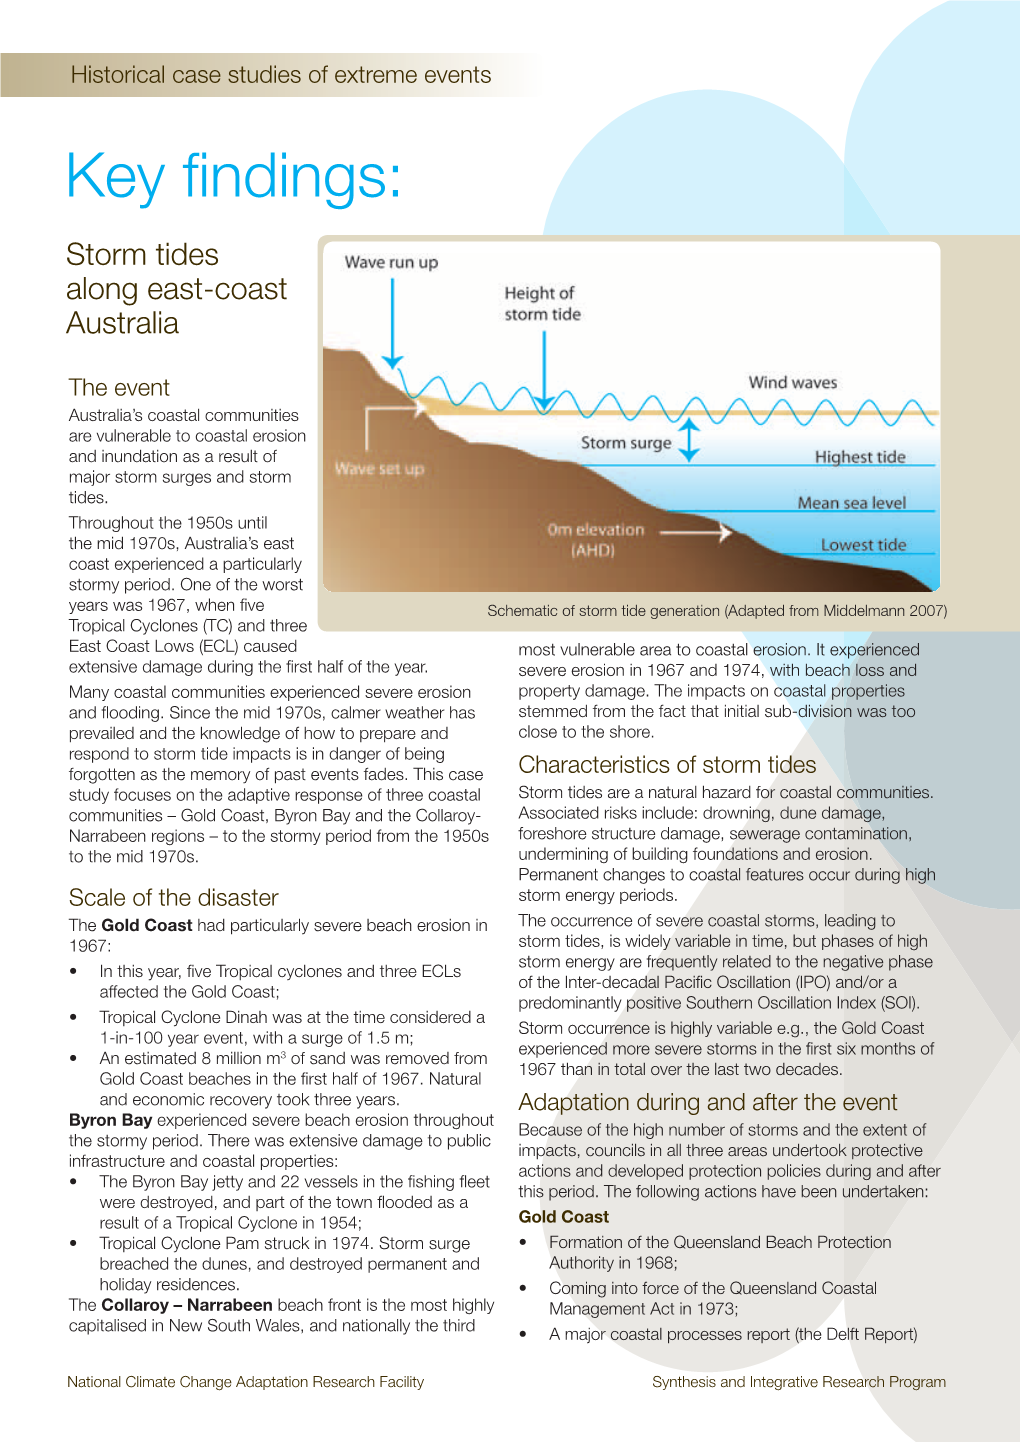 Storm Tides-Summary of Key Findings.Pdf